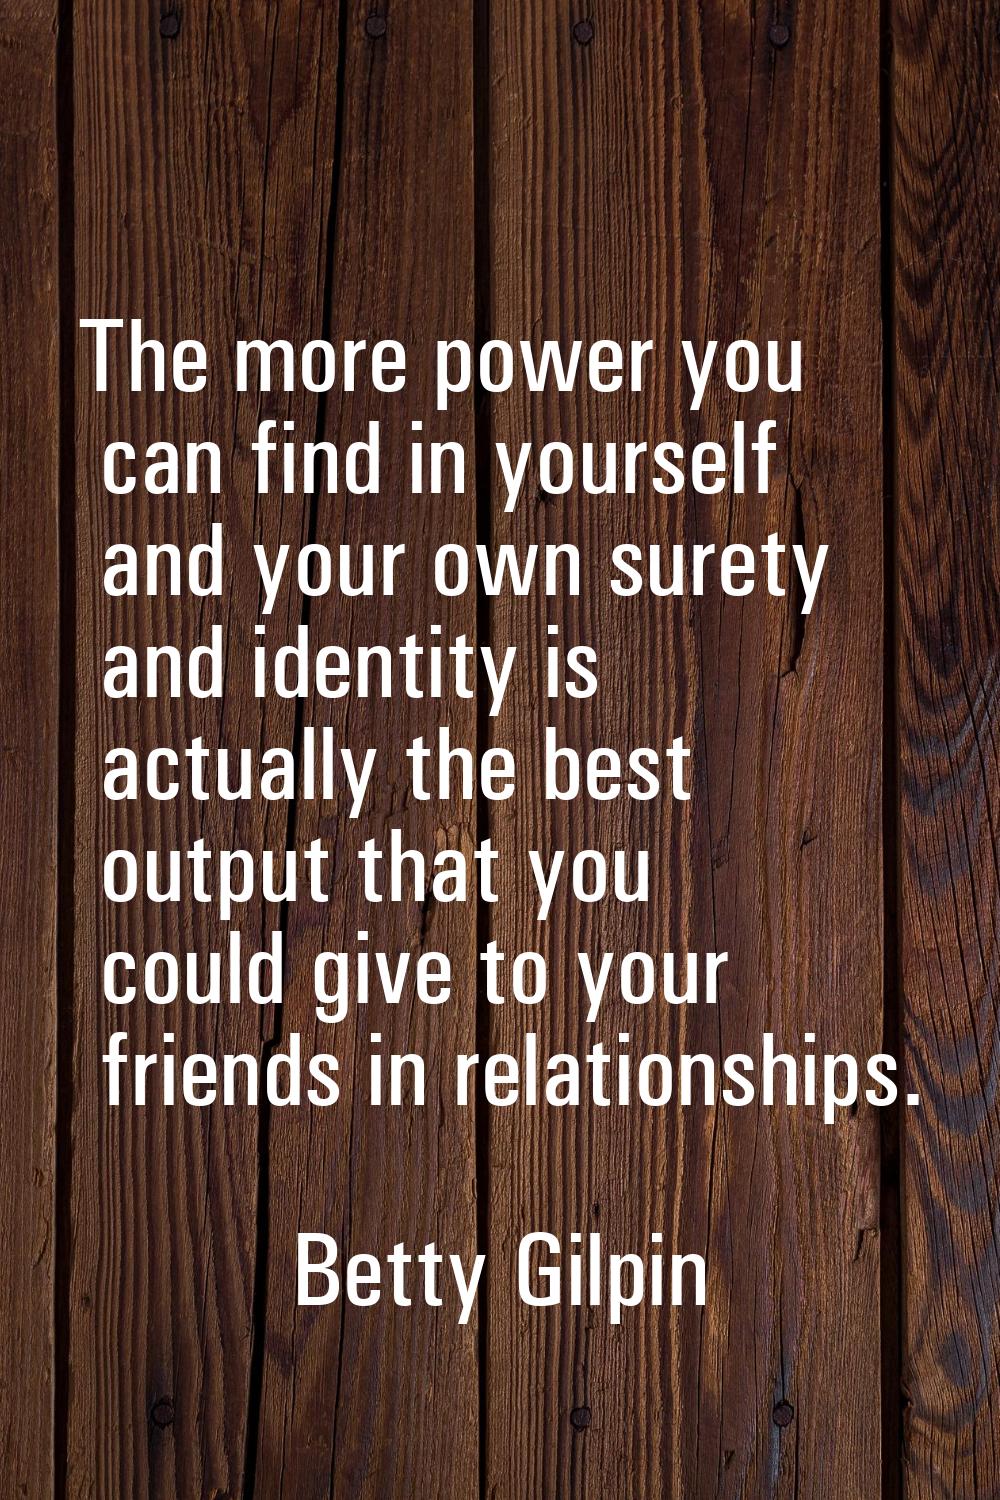 The more power you can find in yourself and your own surety and identity is actually the best outpu